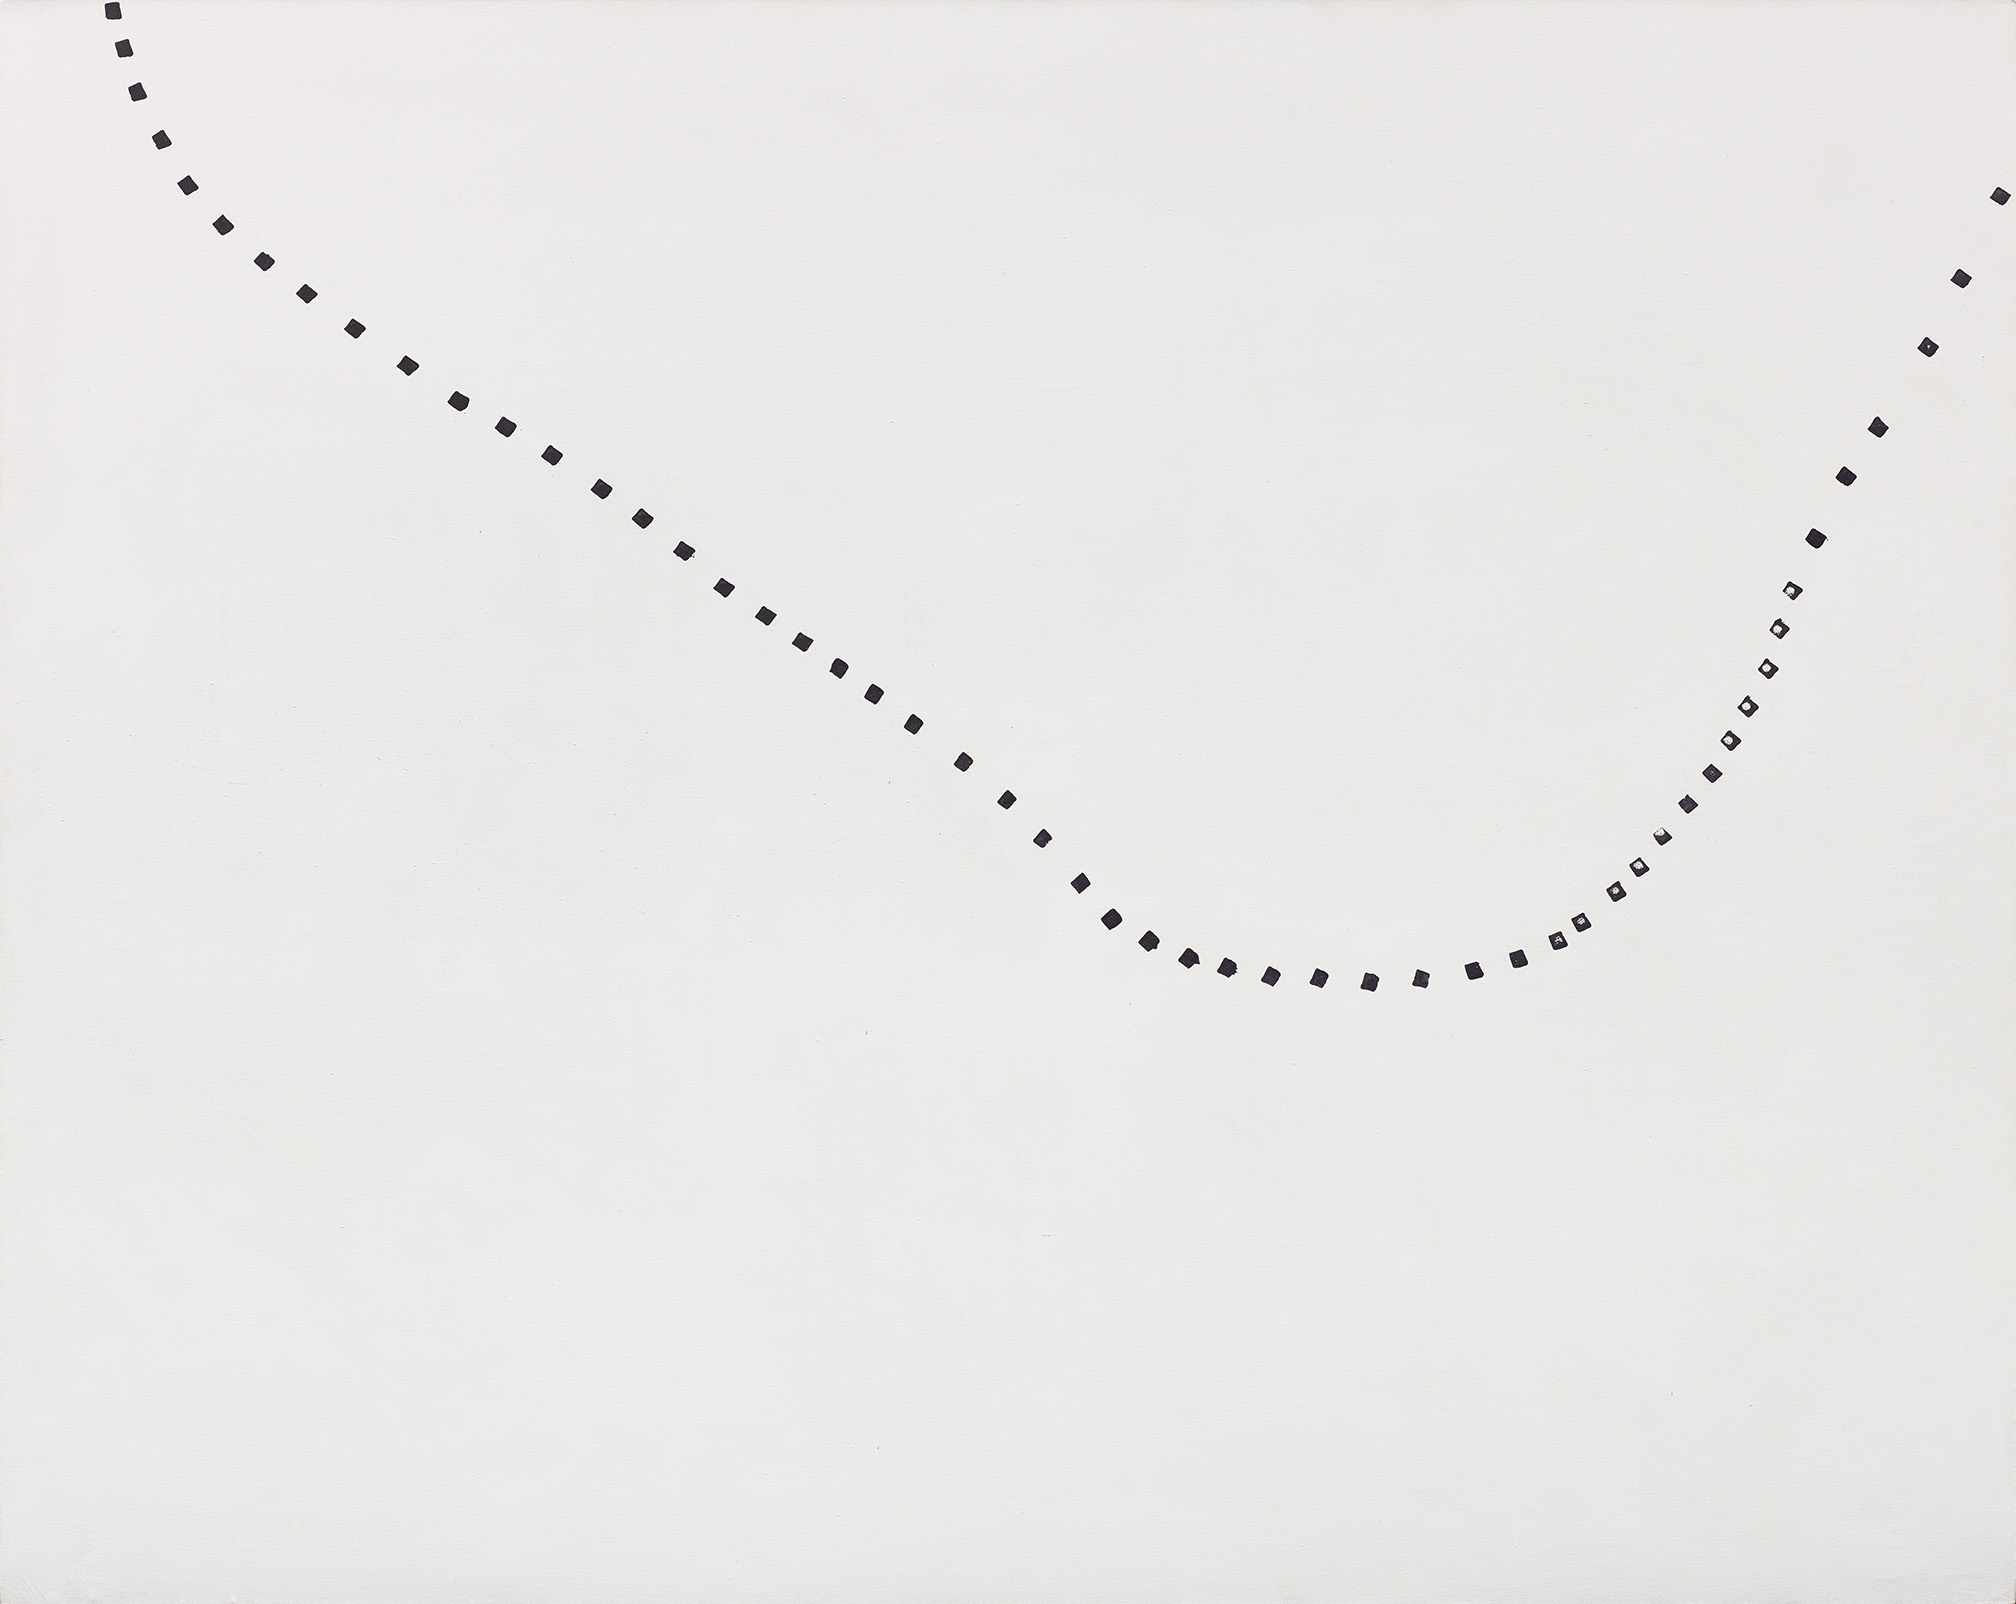 Paterson Ewen, Traces through Space, 1970